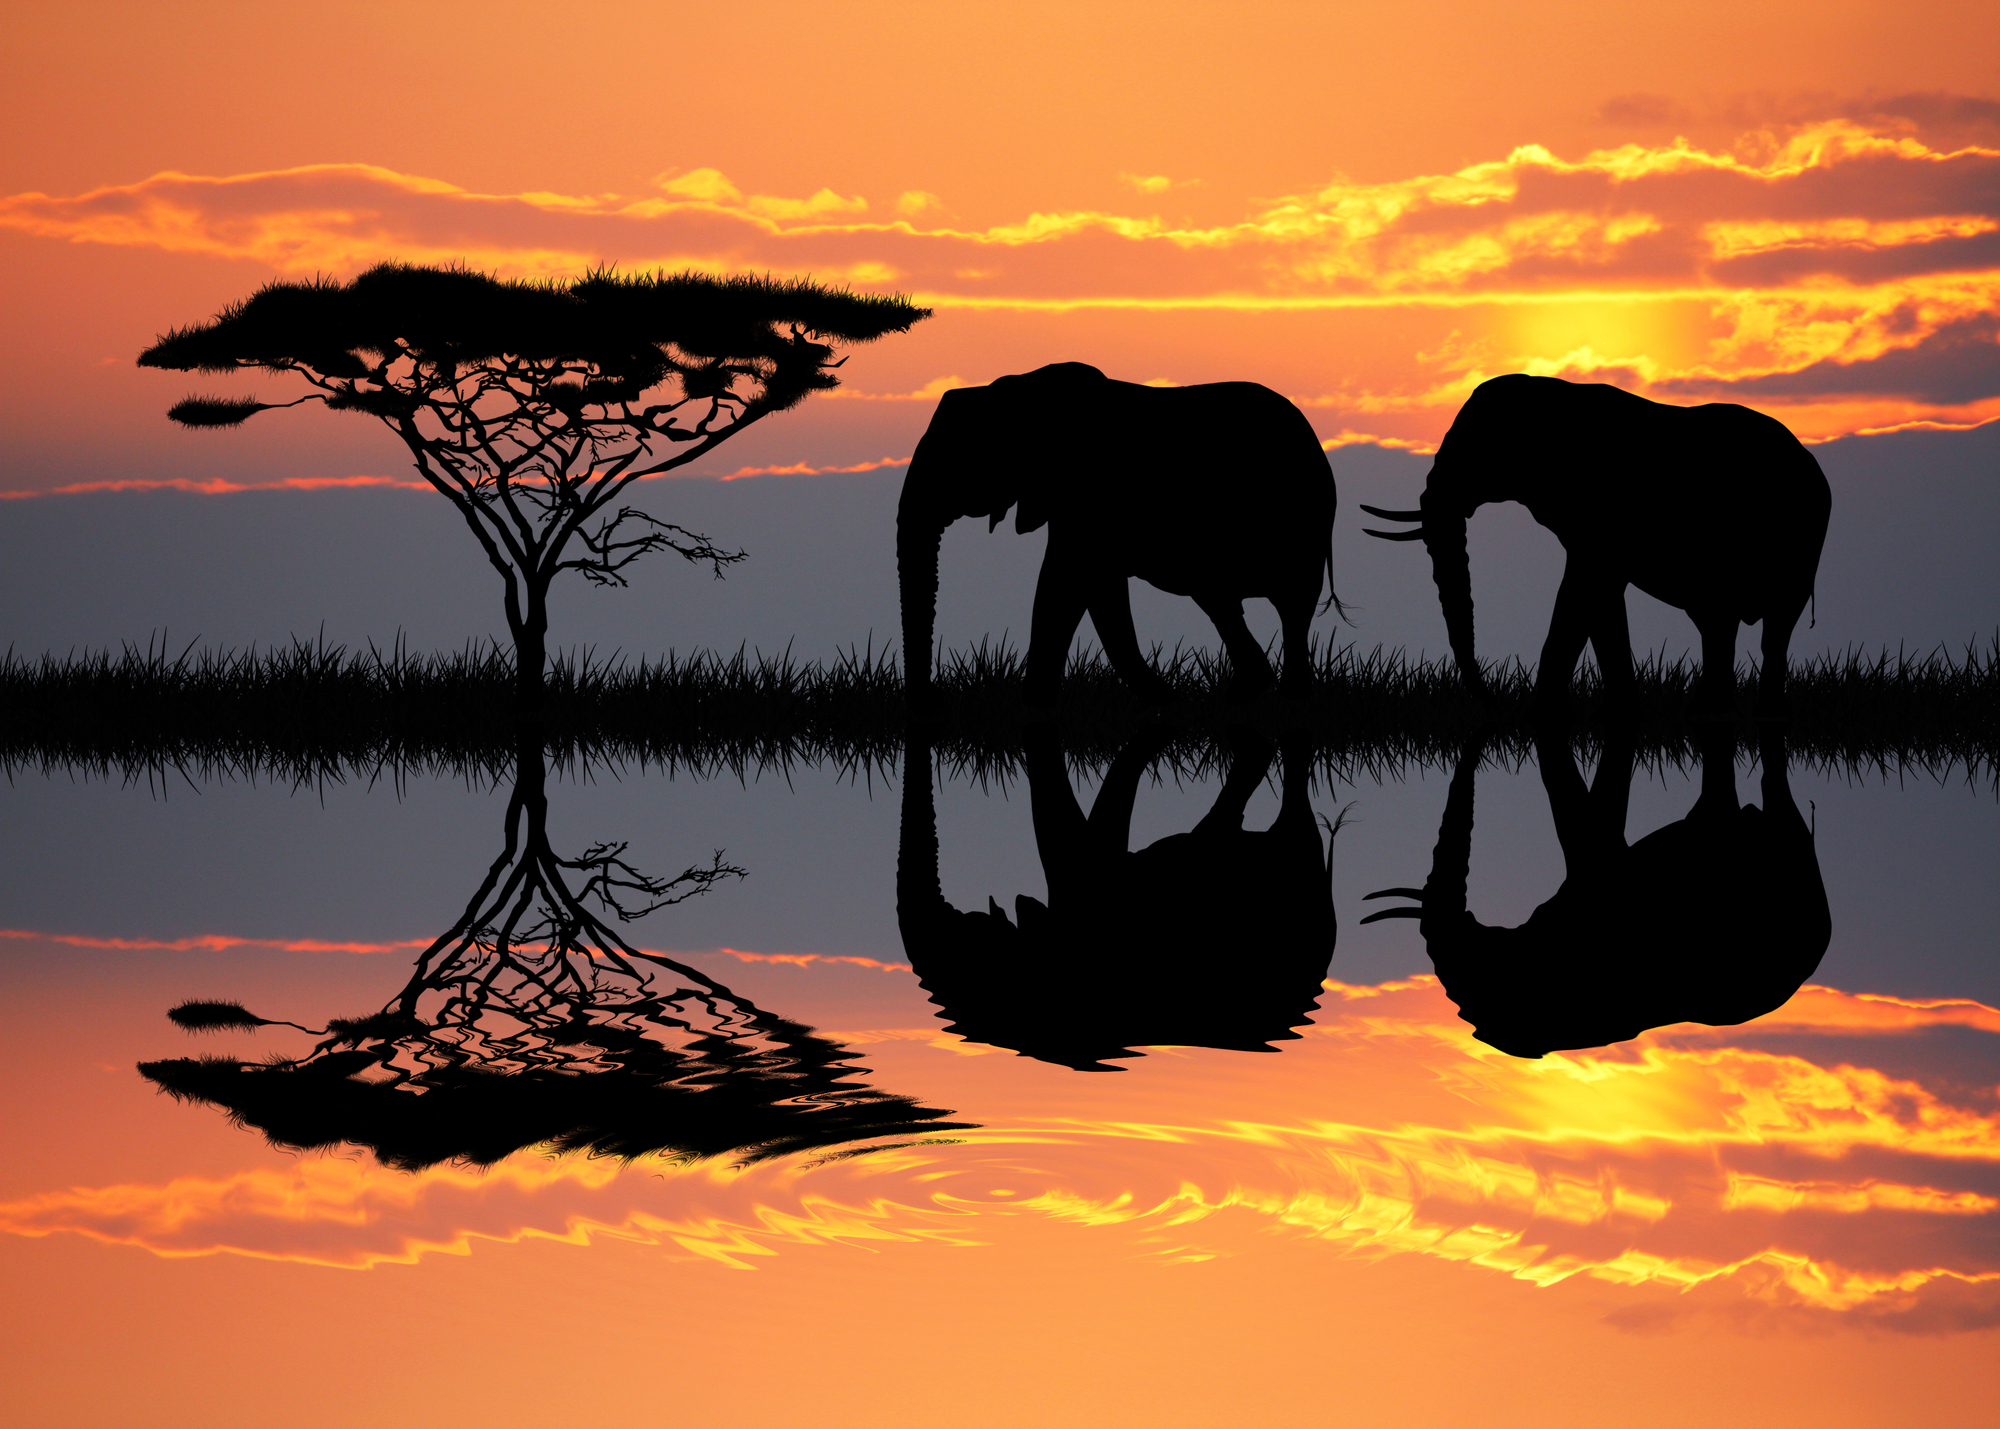 Elephants at sunset in Africa